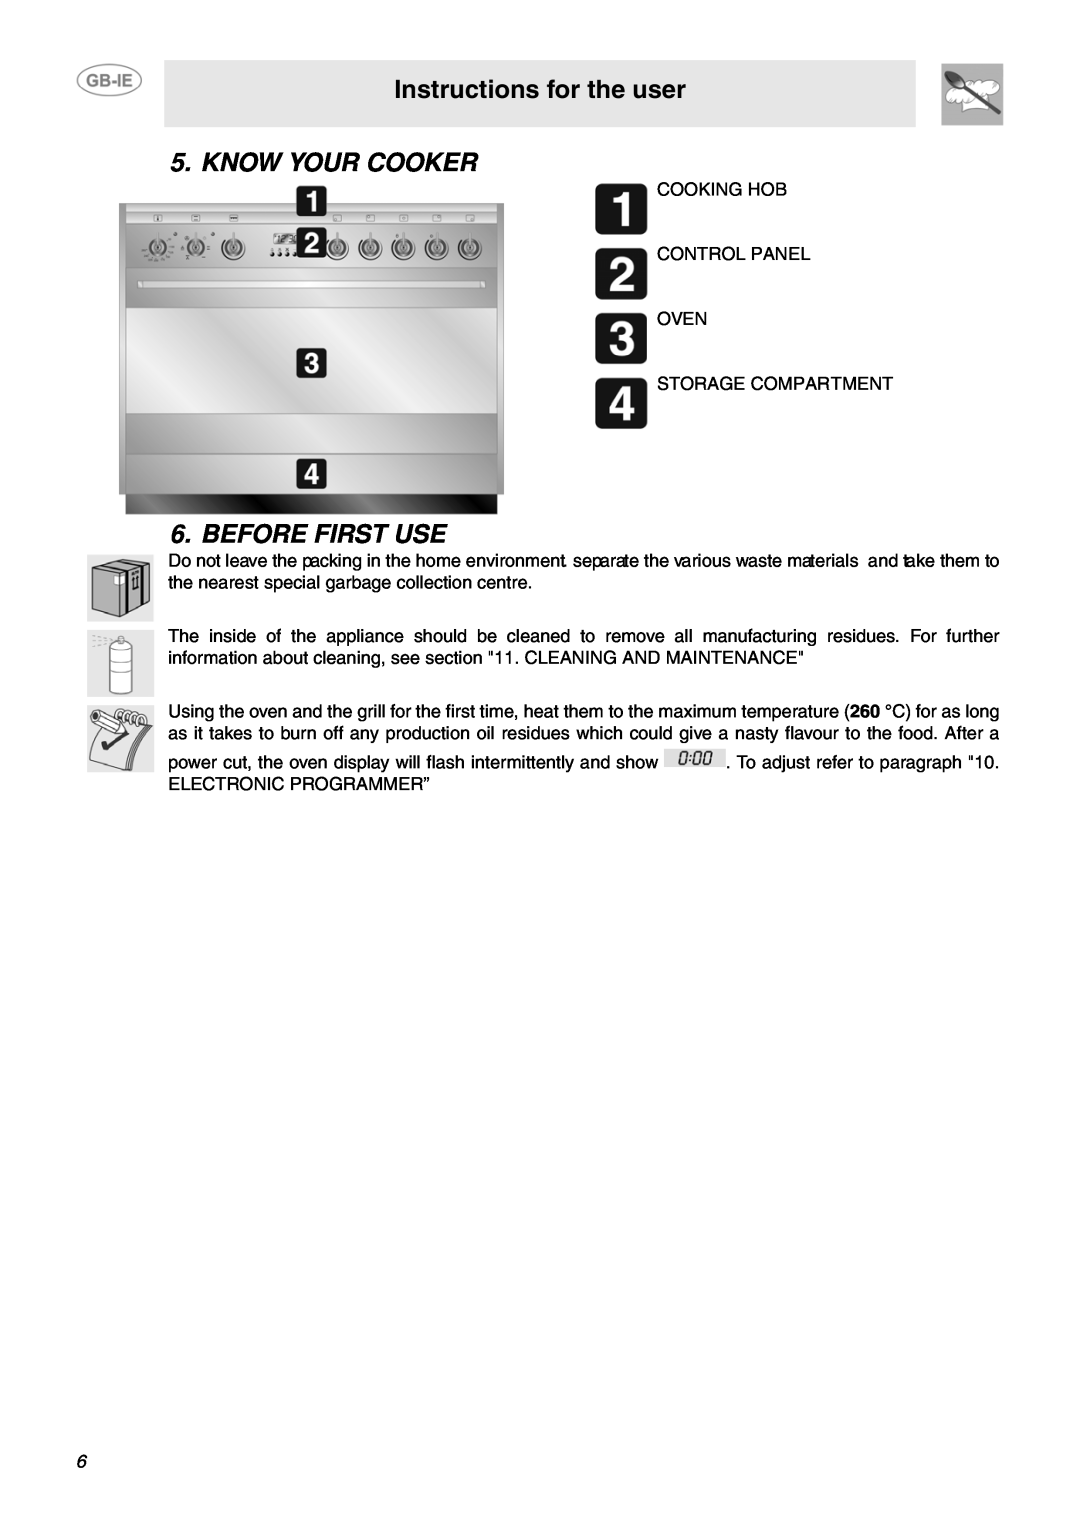 Smeg SUK91CMX5 manual Instructions for the user, Know Your Cooker, Before First Use 